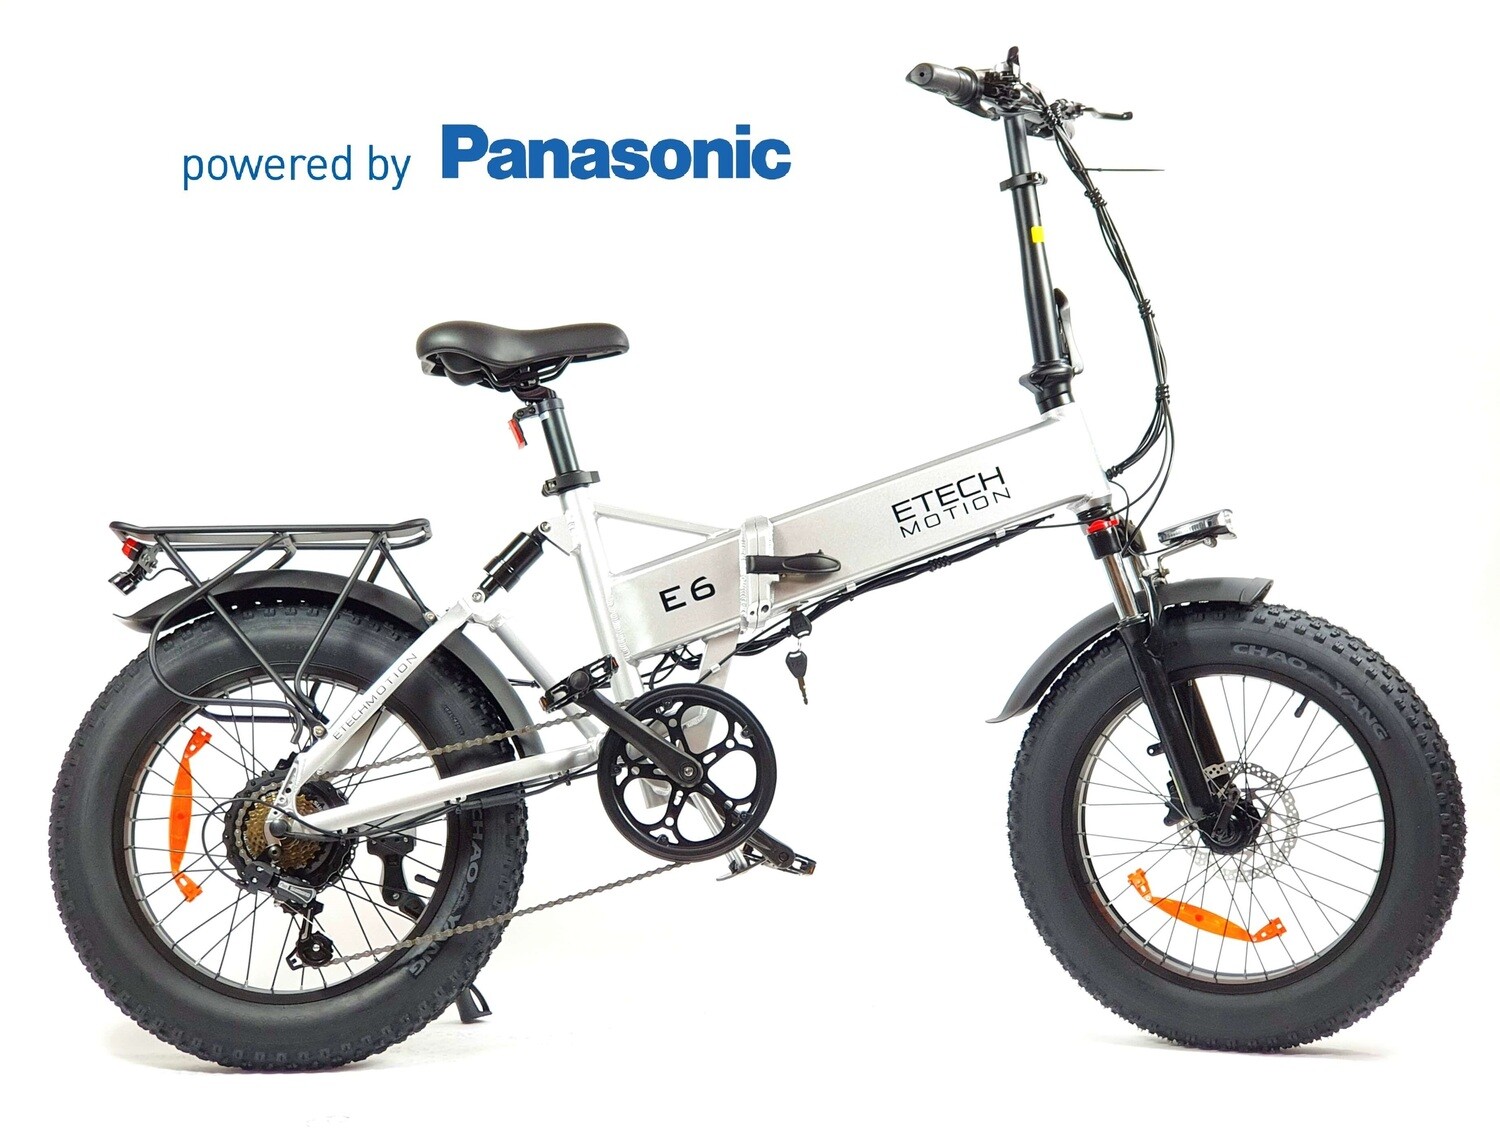 E6 Fat Tyre Electric Bike Best Delivery eBike Panasonic 48V 20Ah Battery Silver